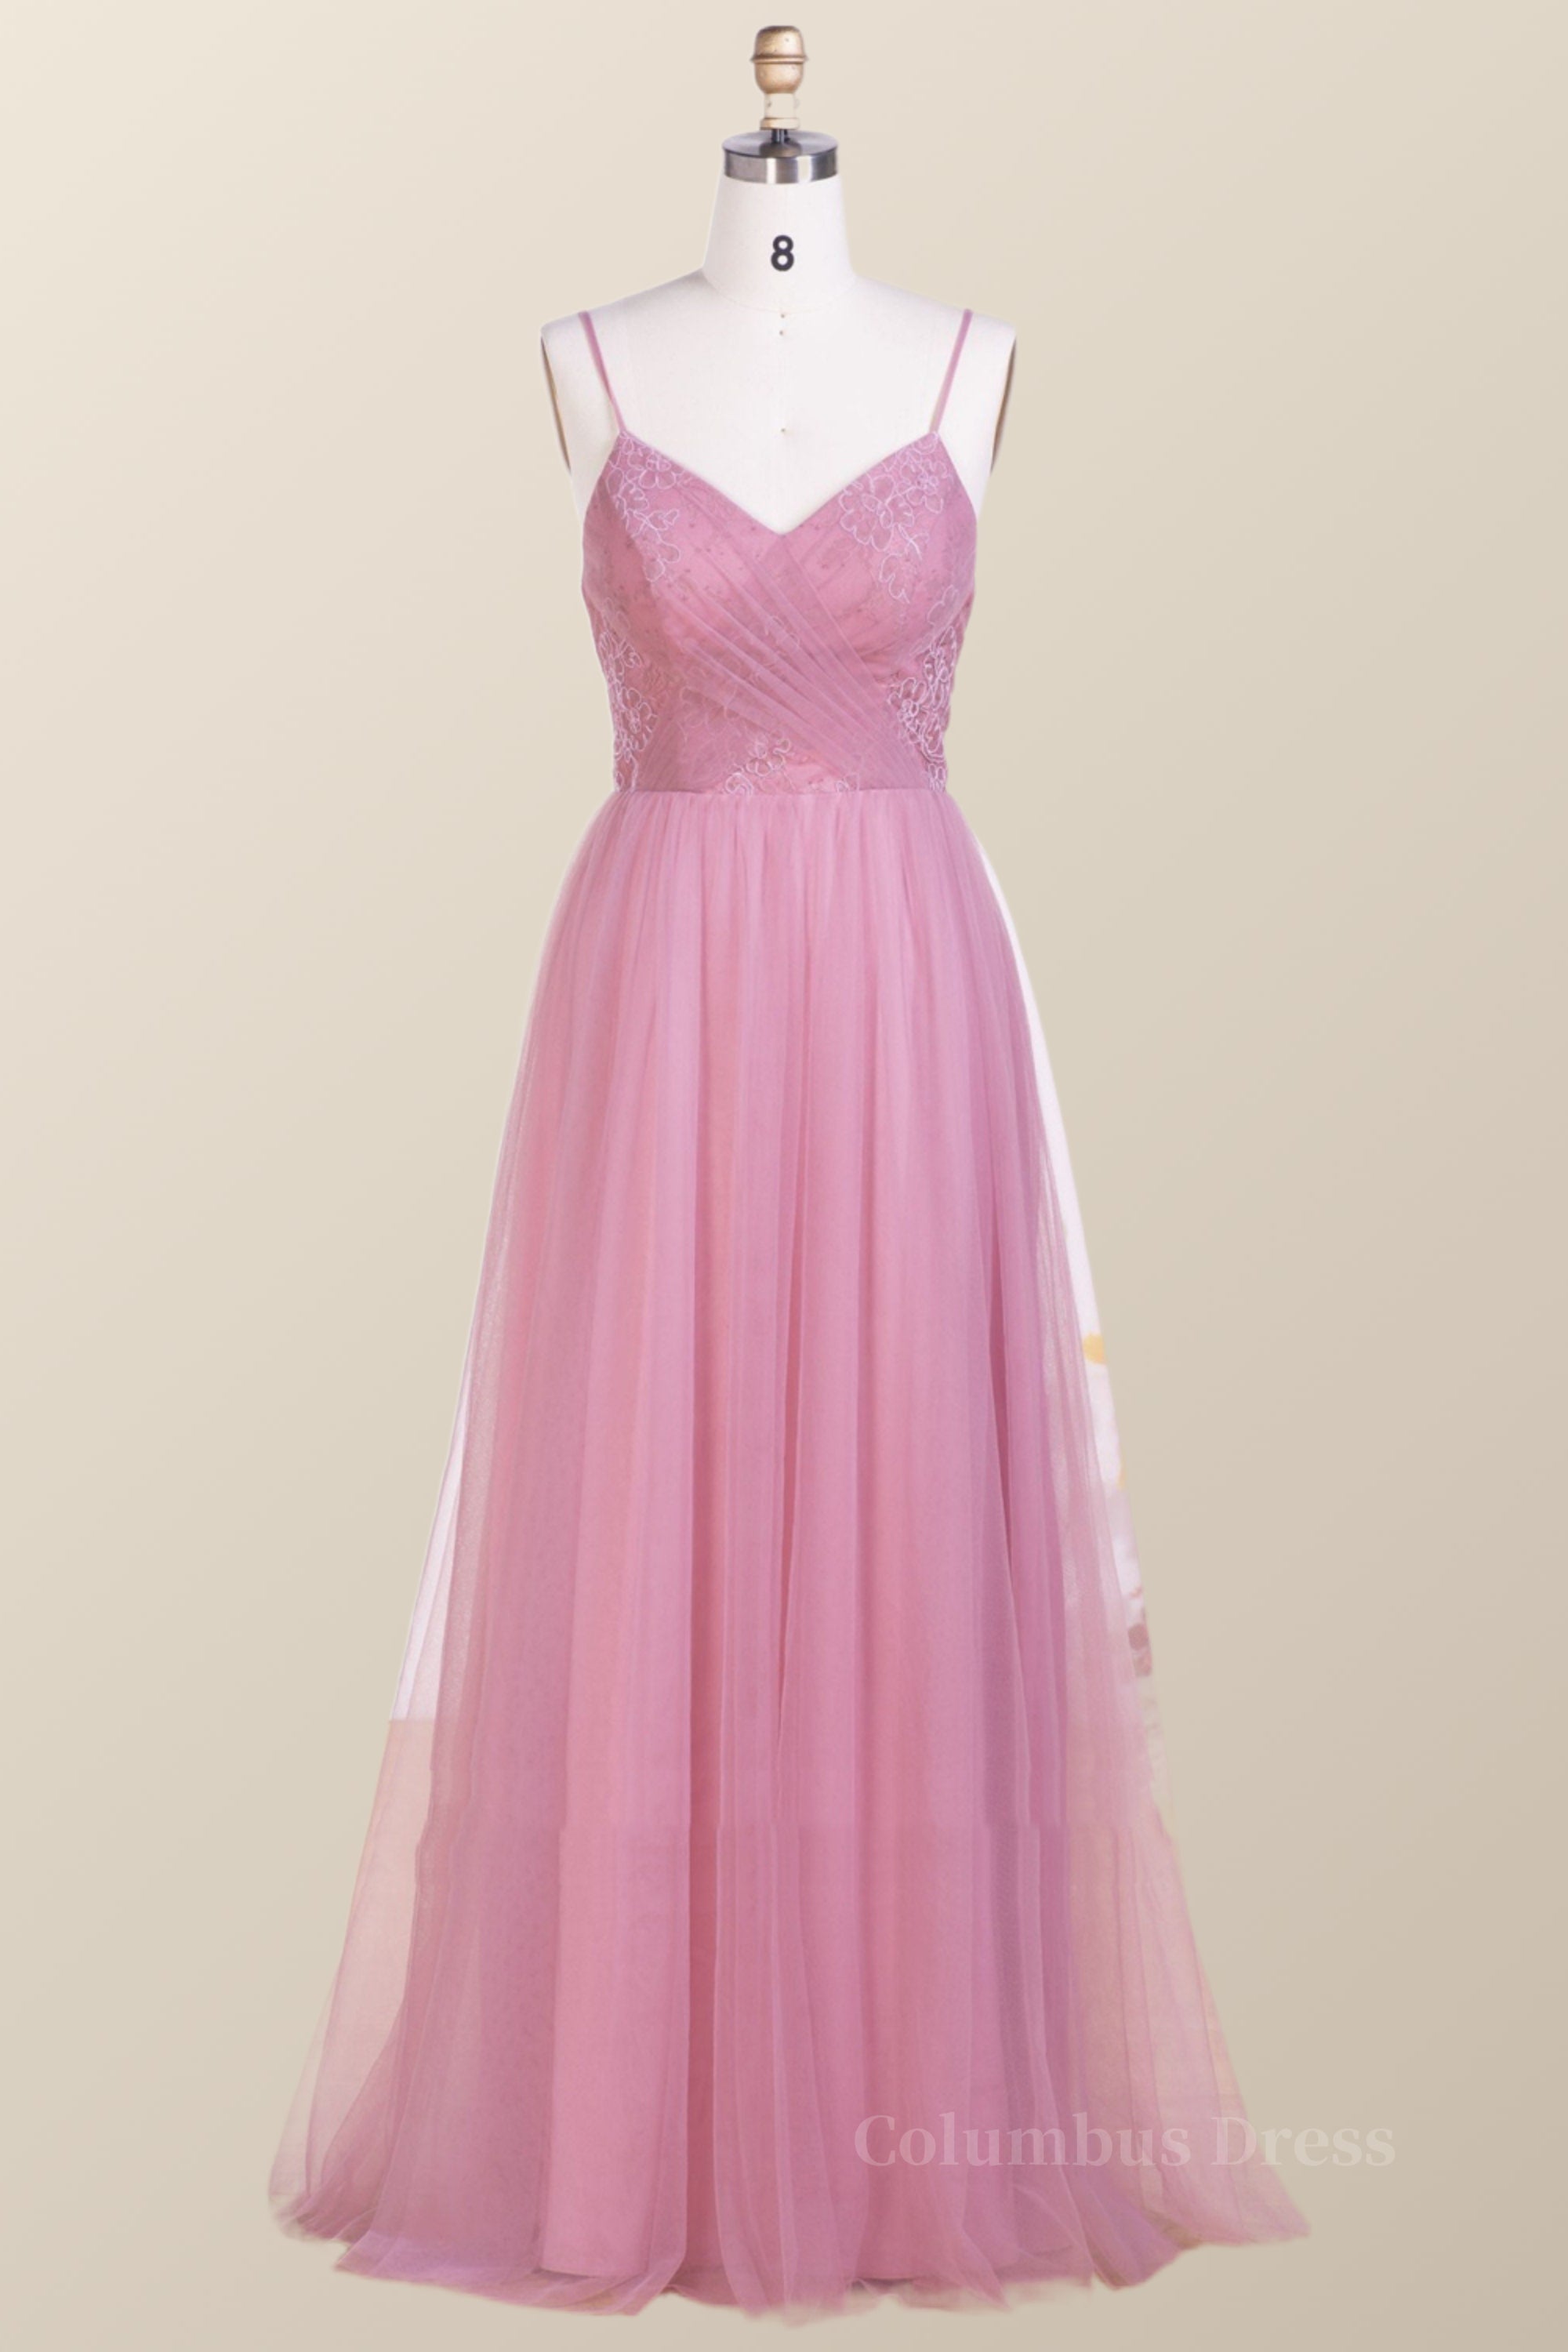 Straps Blush Pink Pleated Tulle Long Corset Bridesmaid Dress outfit, Formal Dresses Graduation